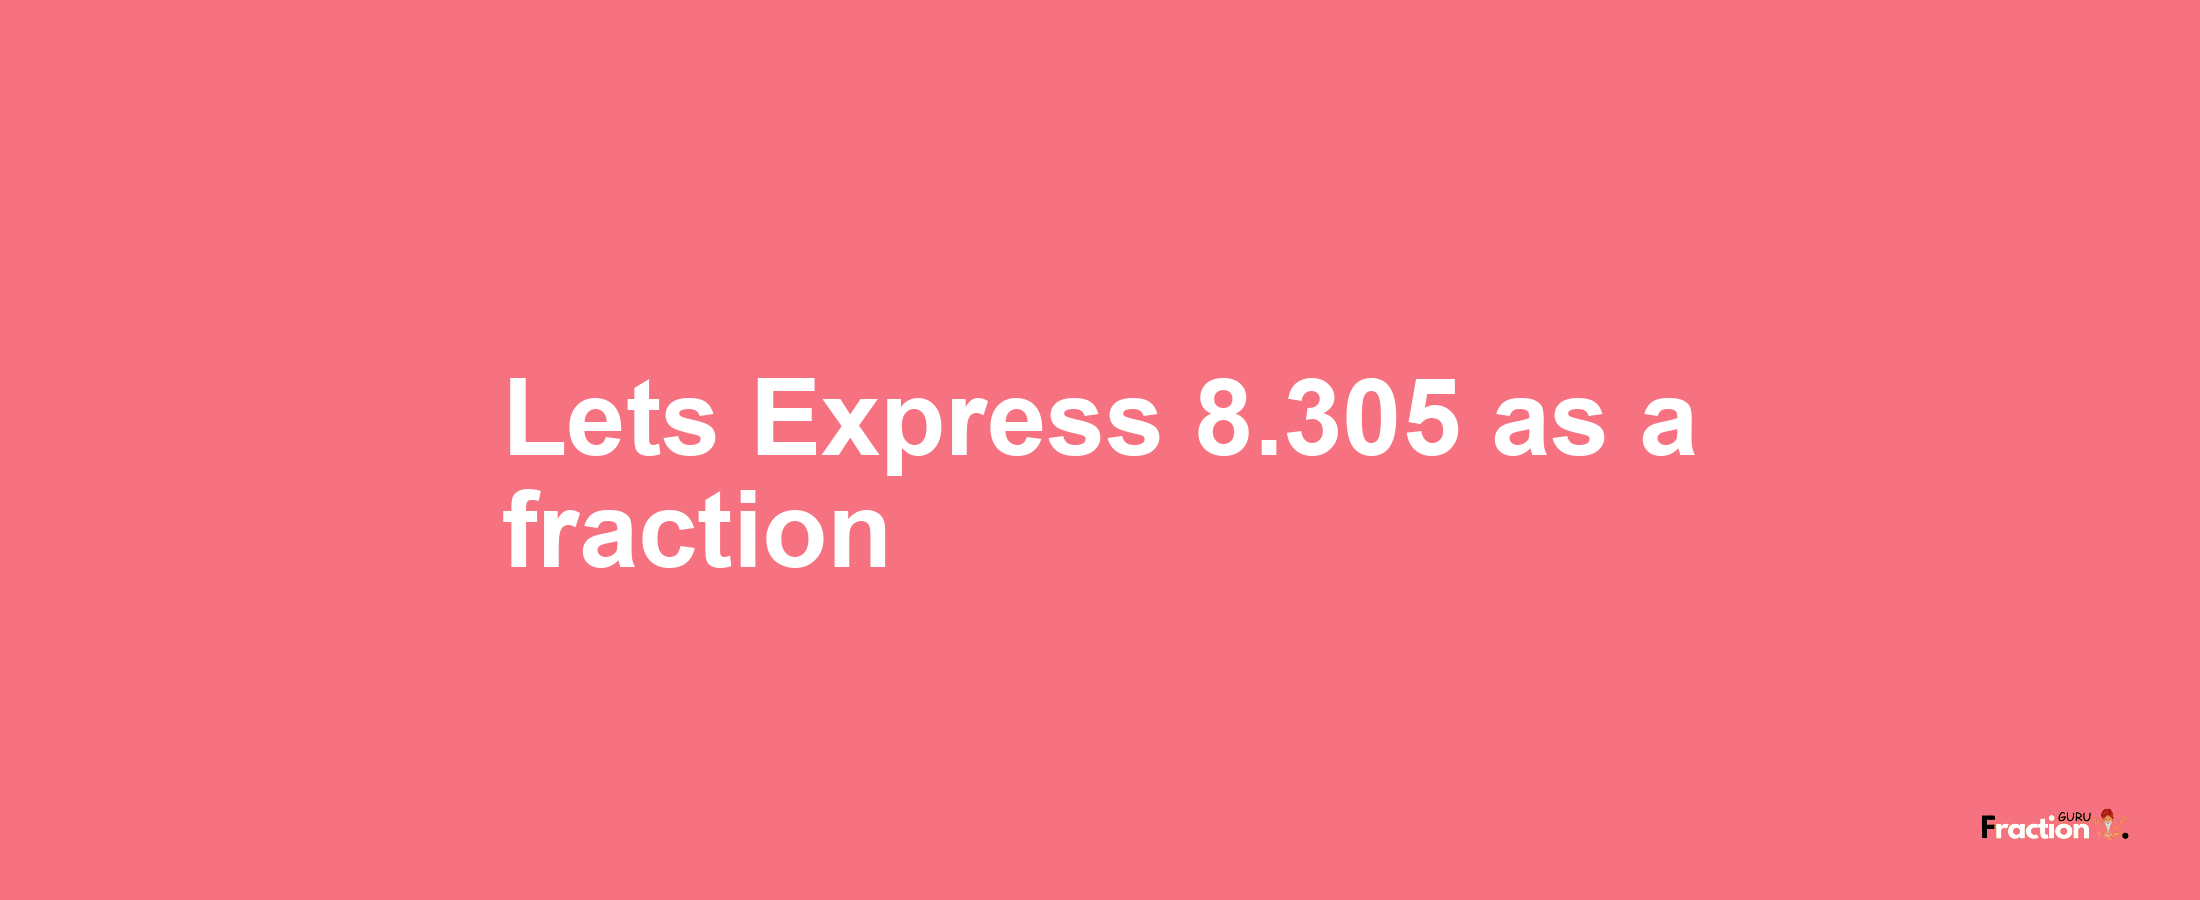 Lets Express 8.305 as afraction